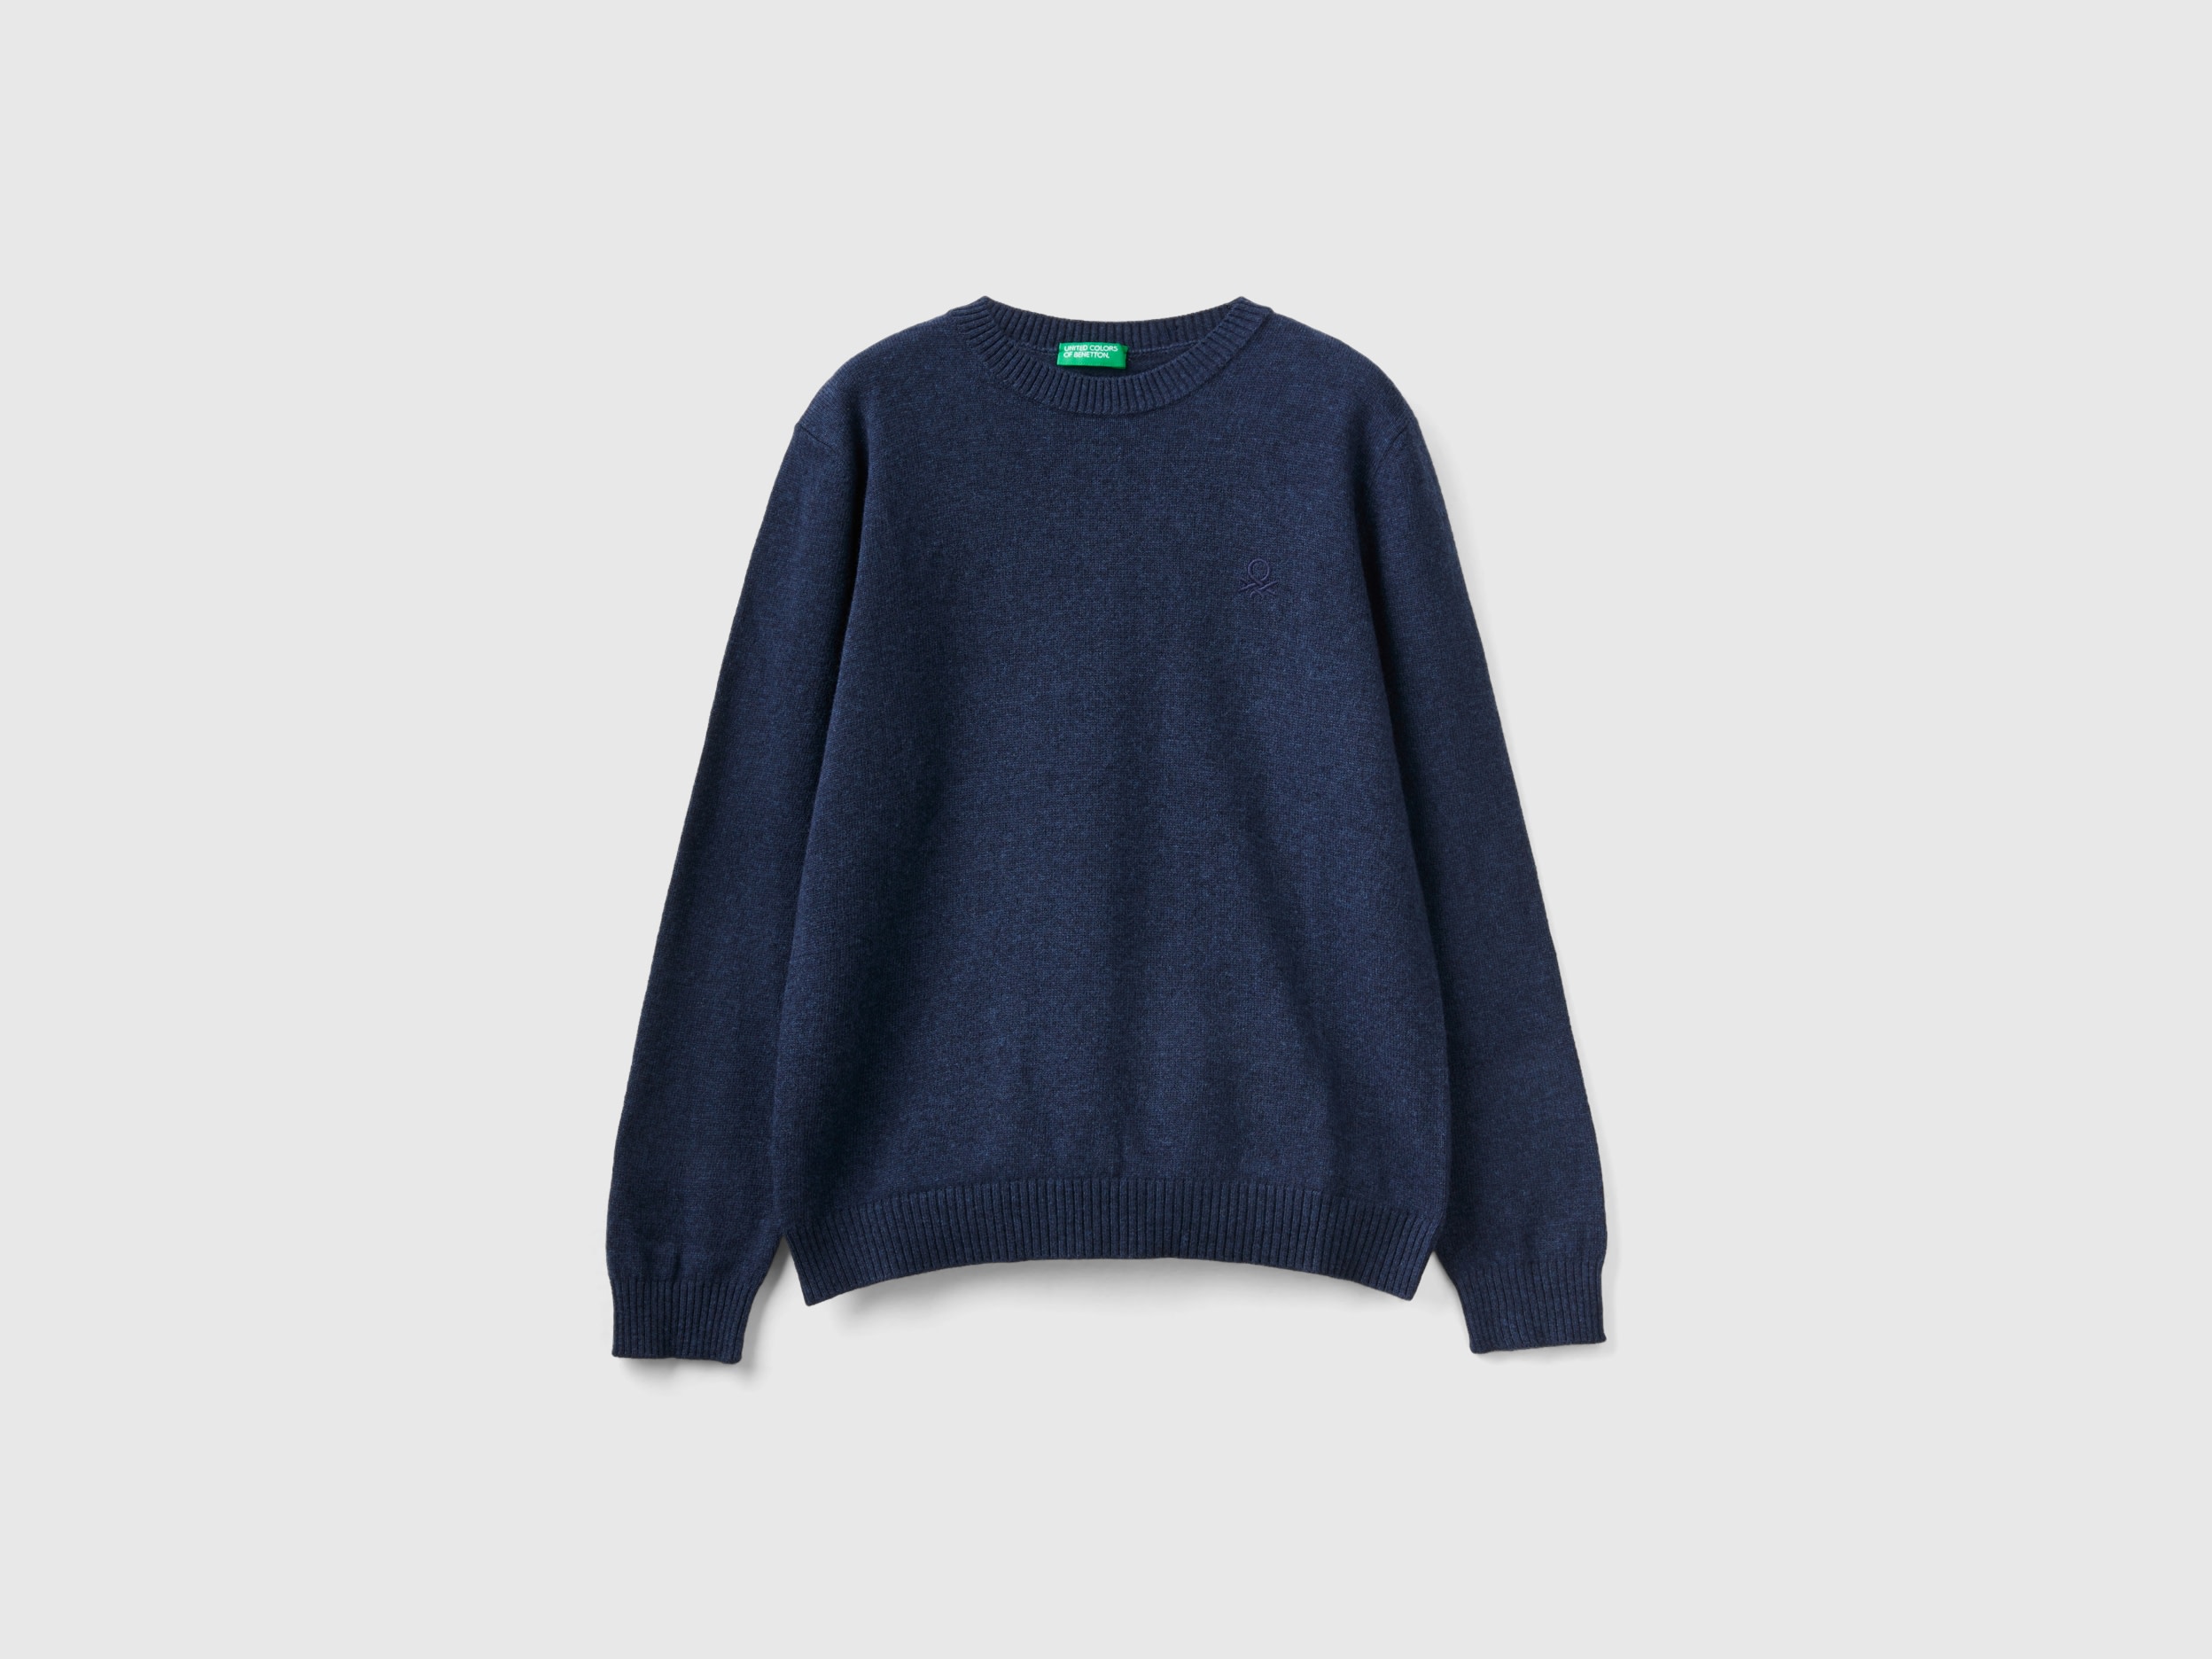 Benetton, Sweater In Cashmere And Wool Blend, size S, Dark Blue, Kids